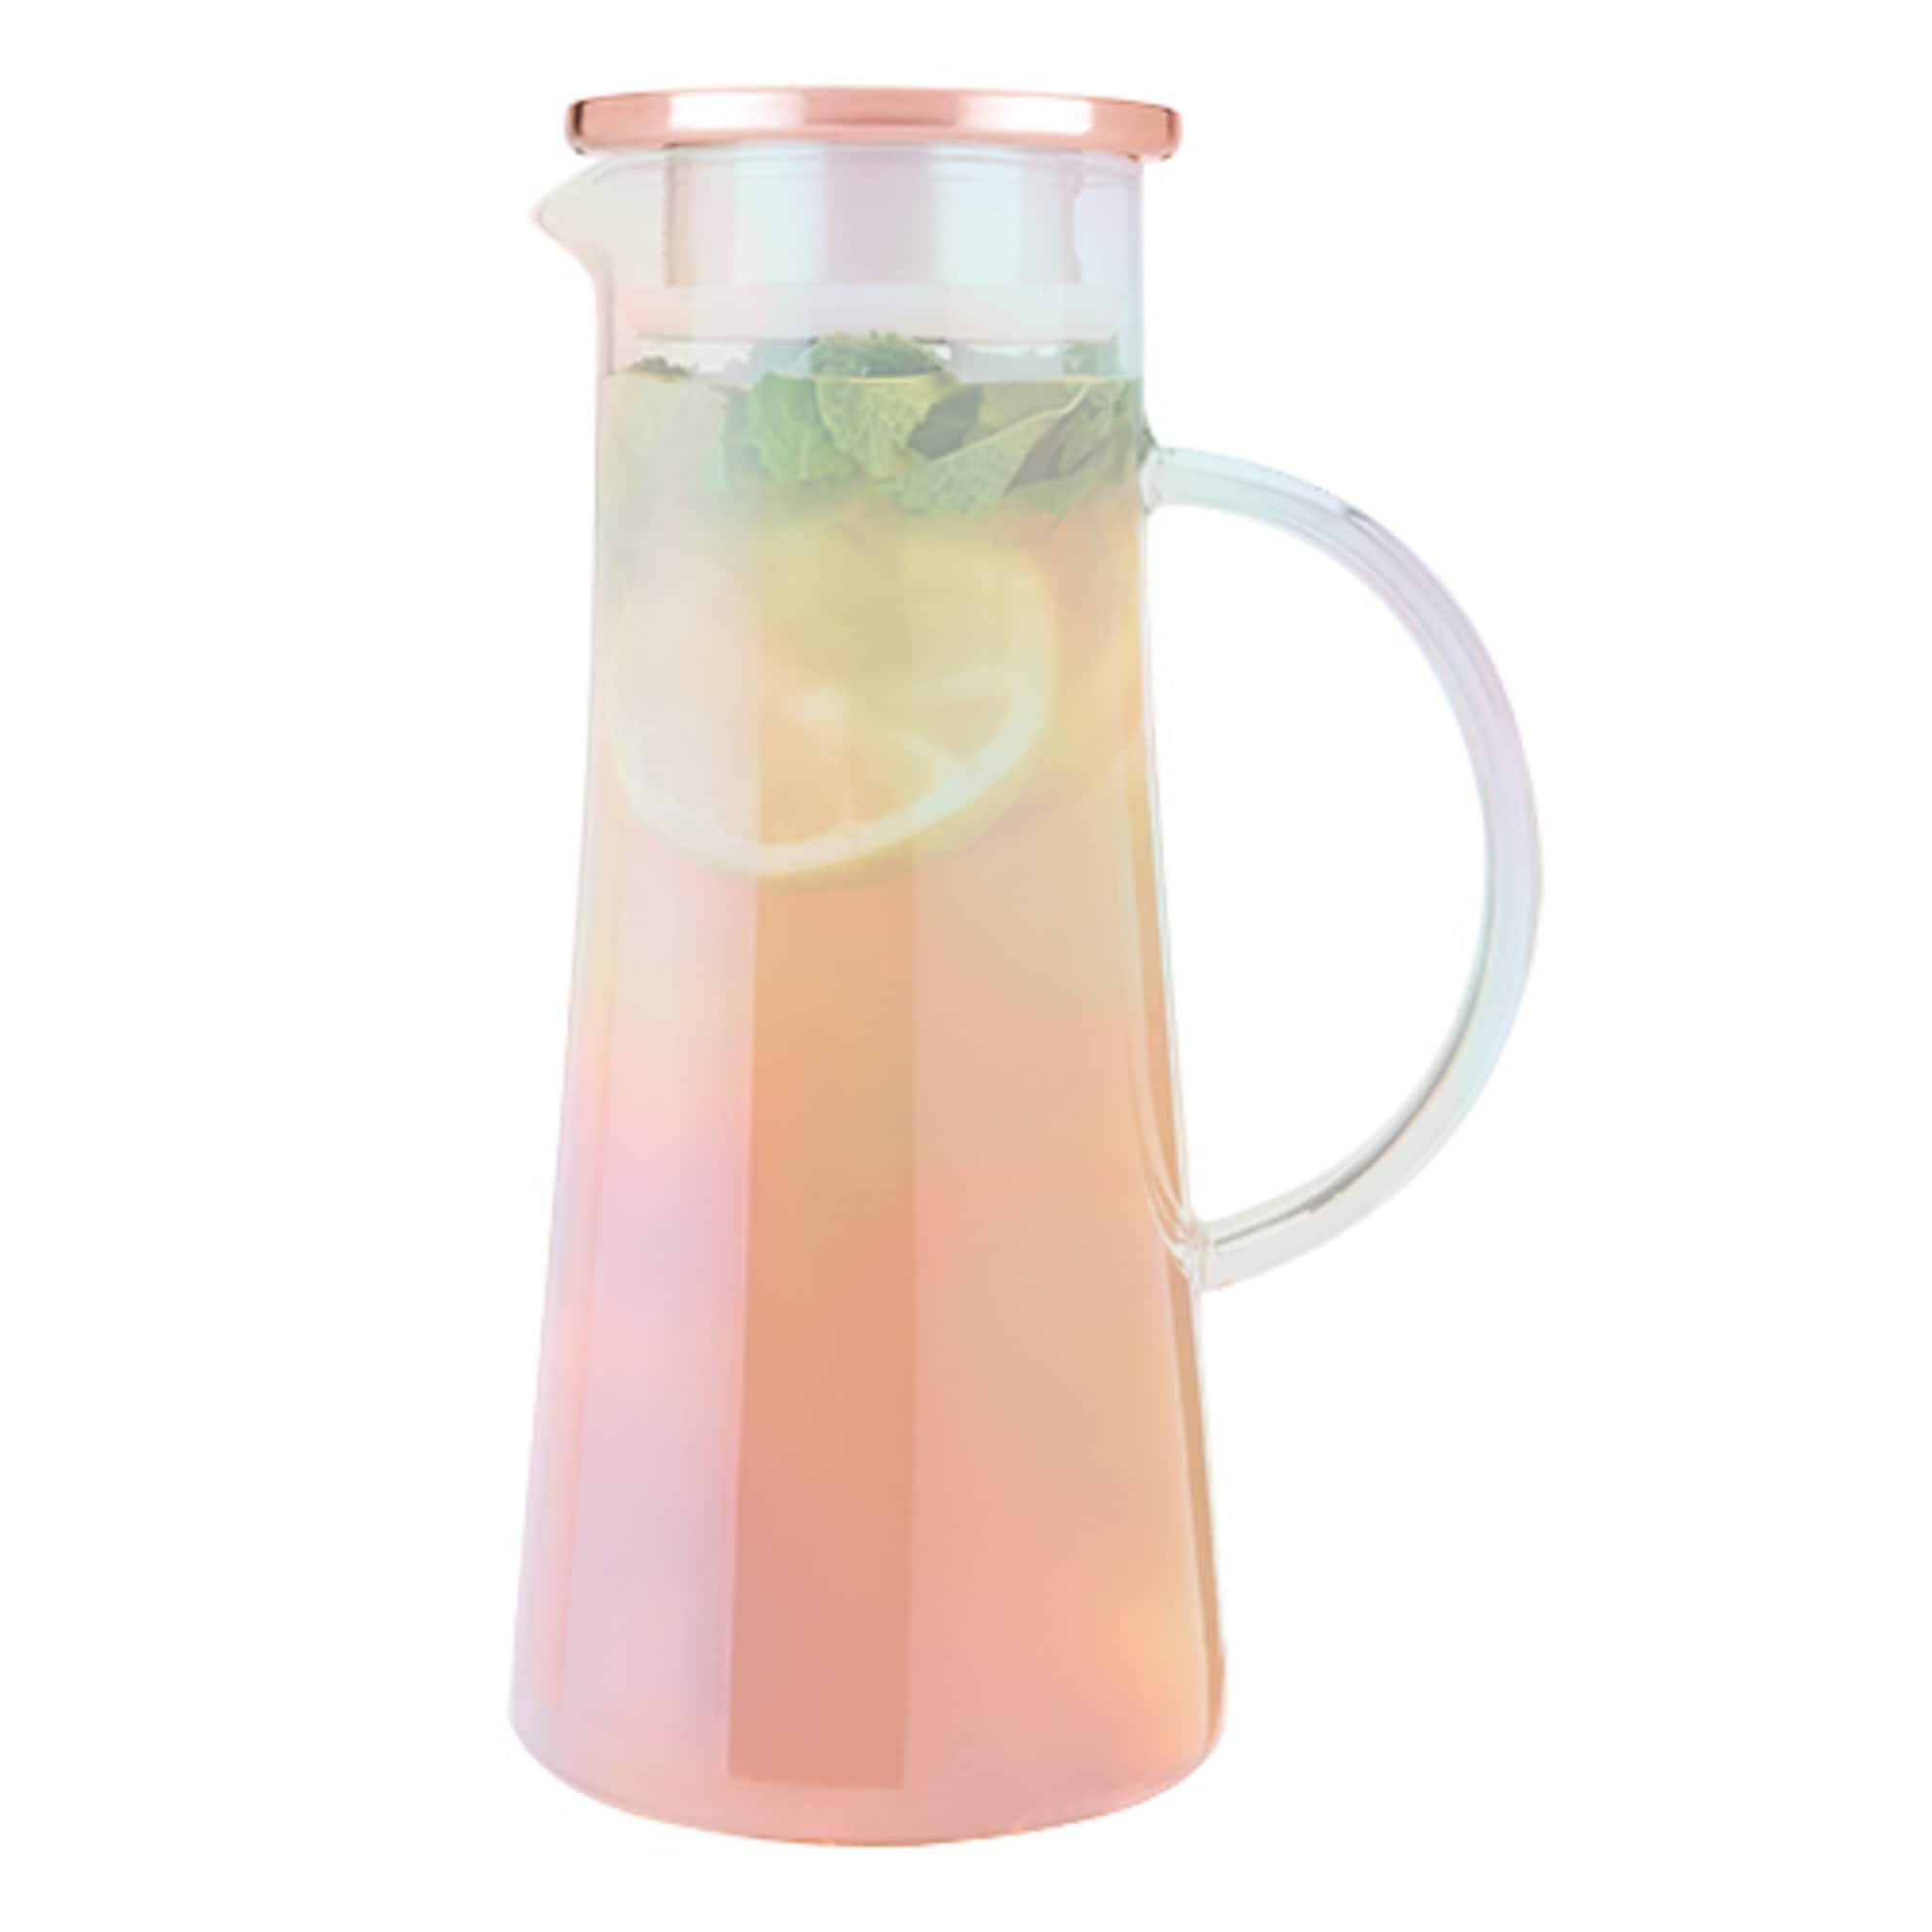 Charlie Iridescent Glass Iced Tea Carafe by Pinky Up - 10 x 6 - On Sale -  Bed Bath & Beyond - 32679173